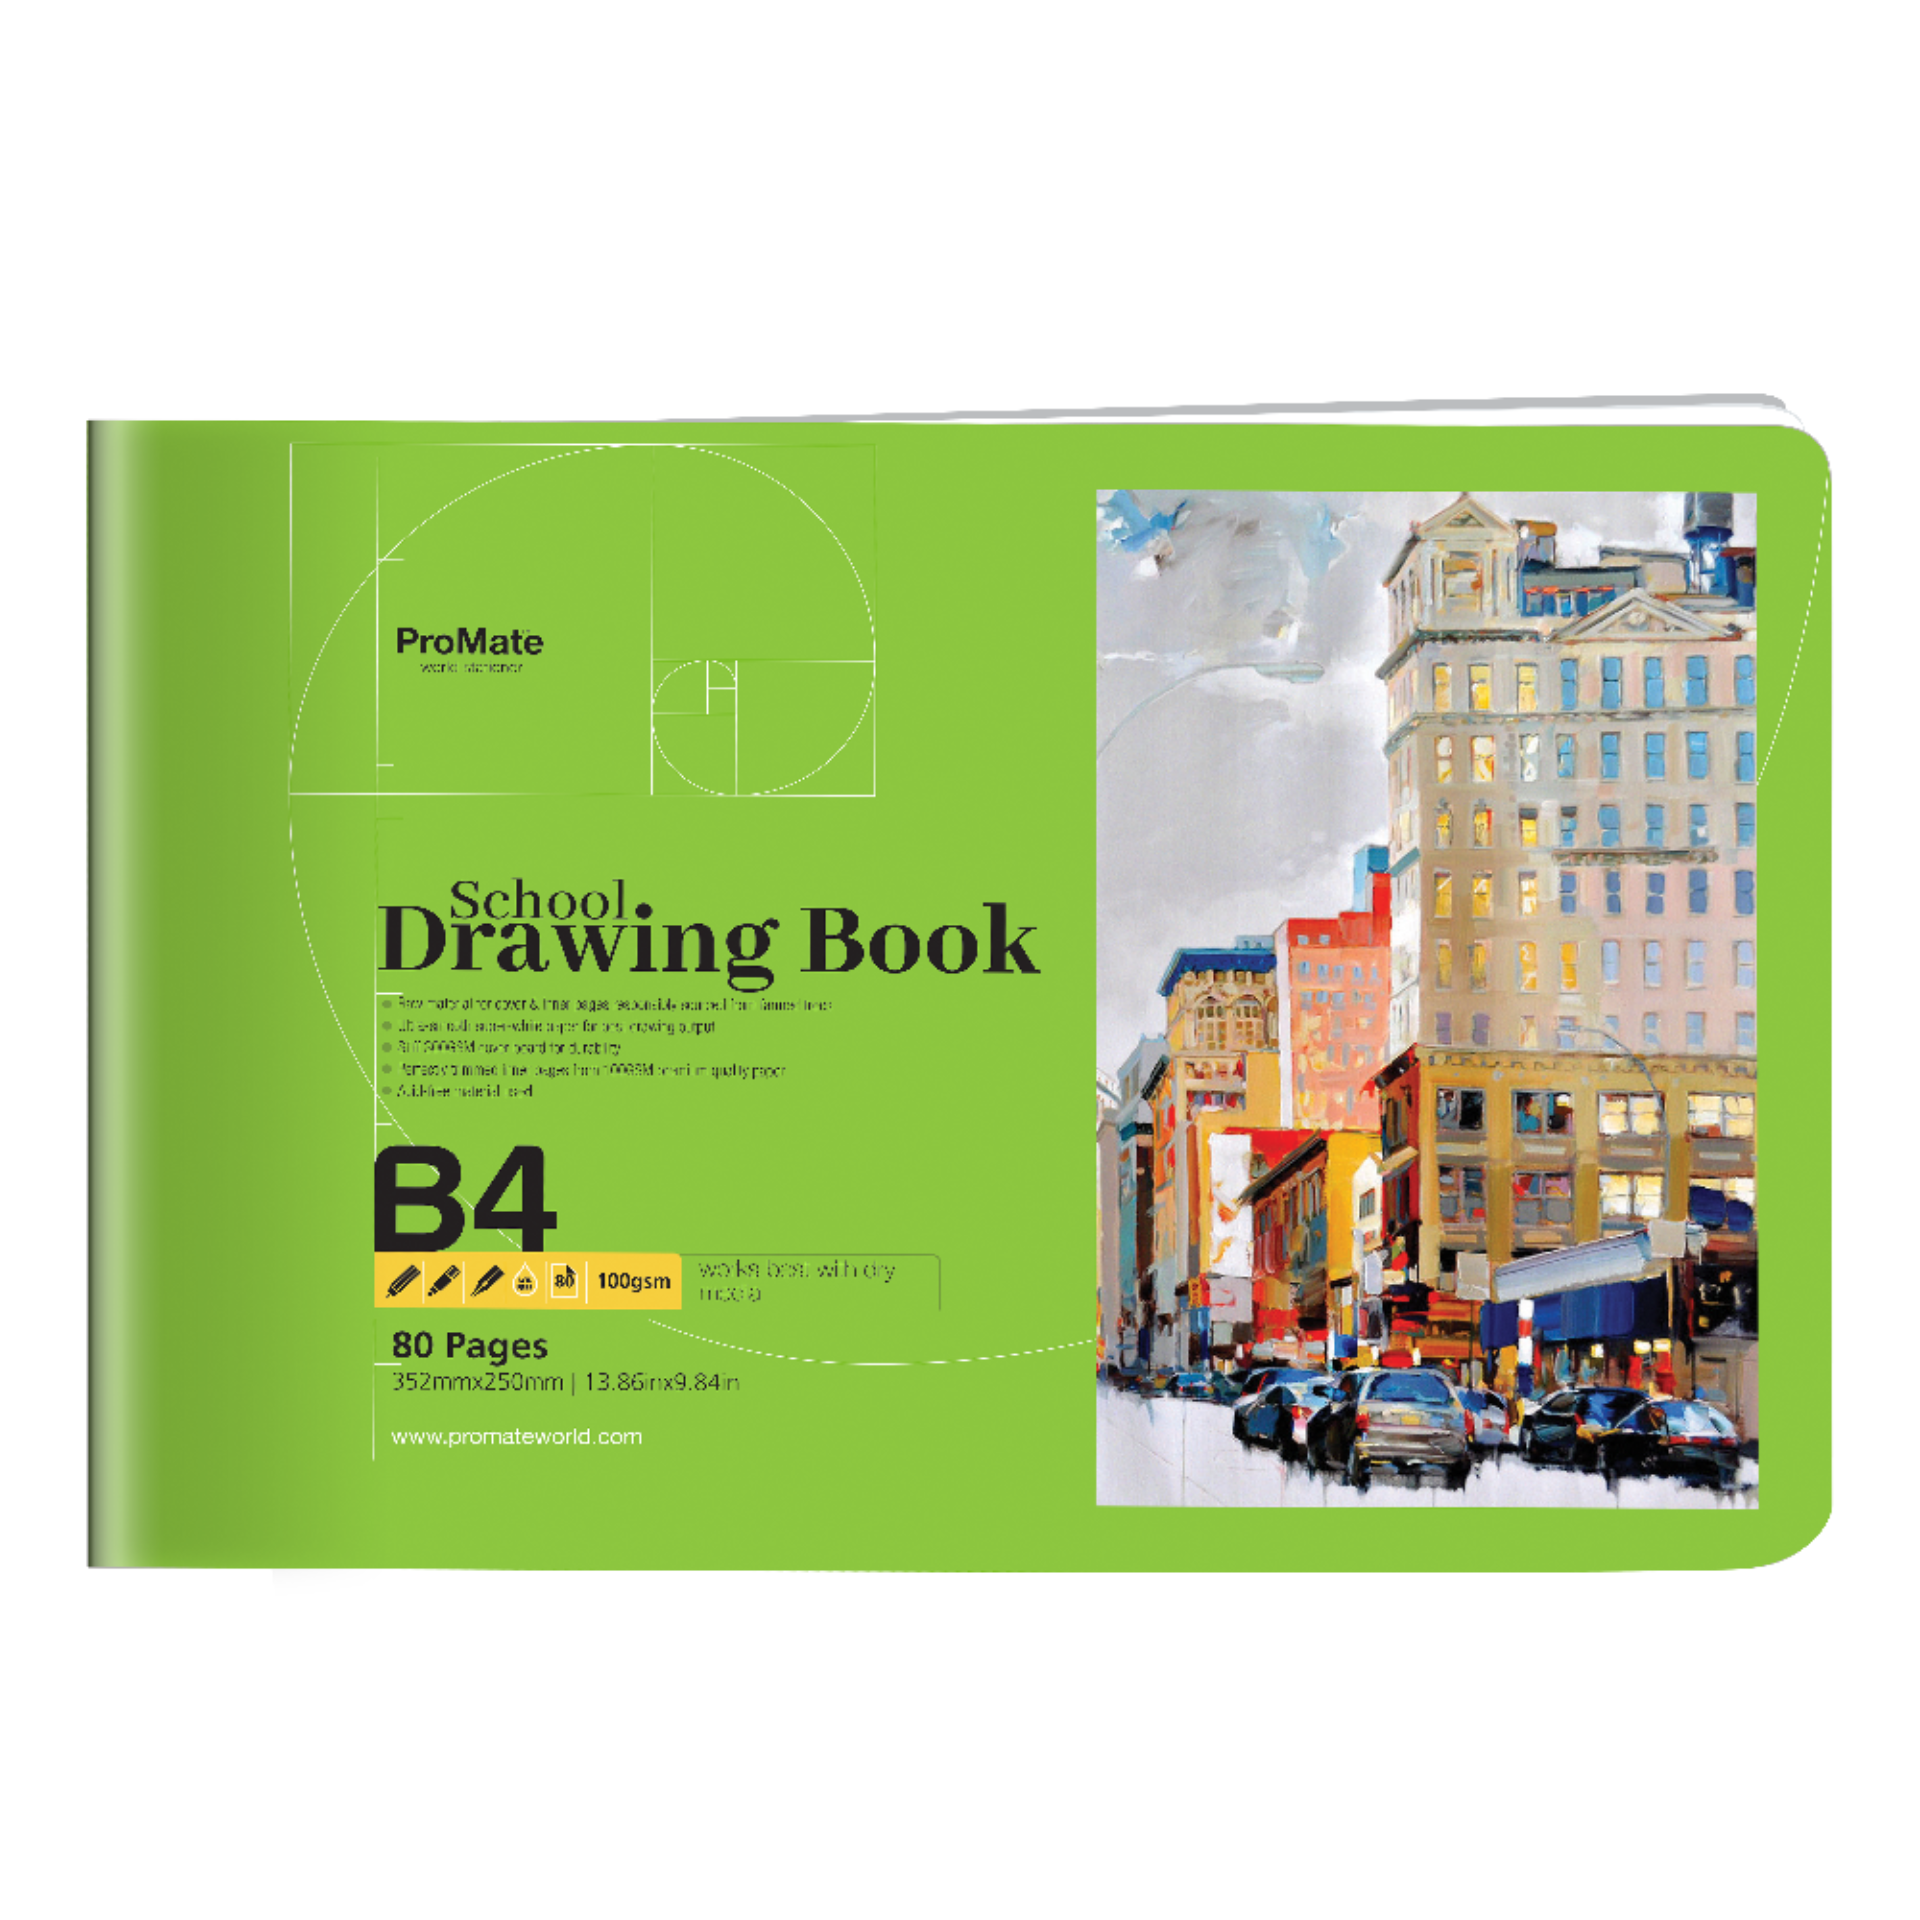 Promate School Drawing Book B4 80 Pages 